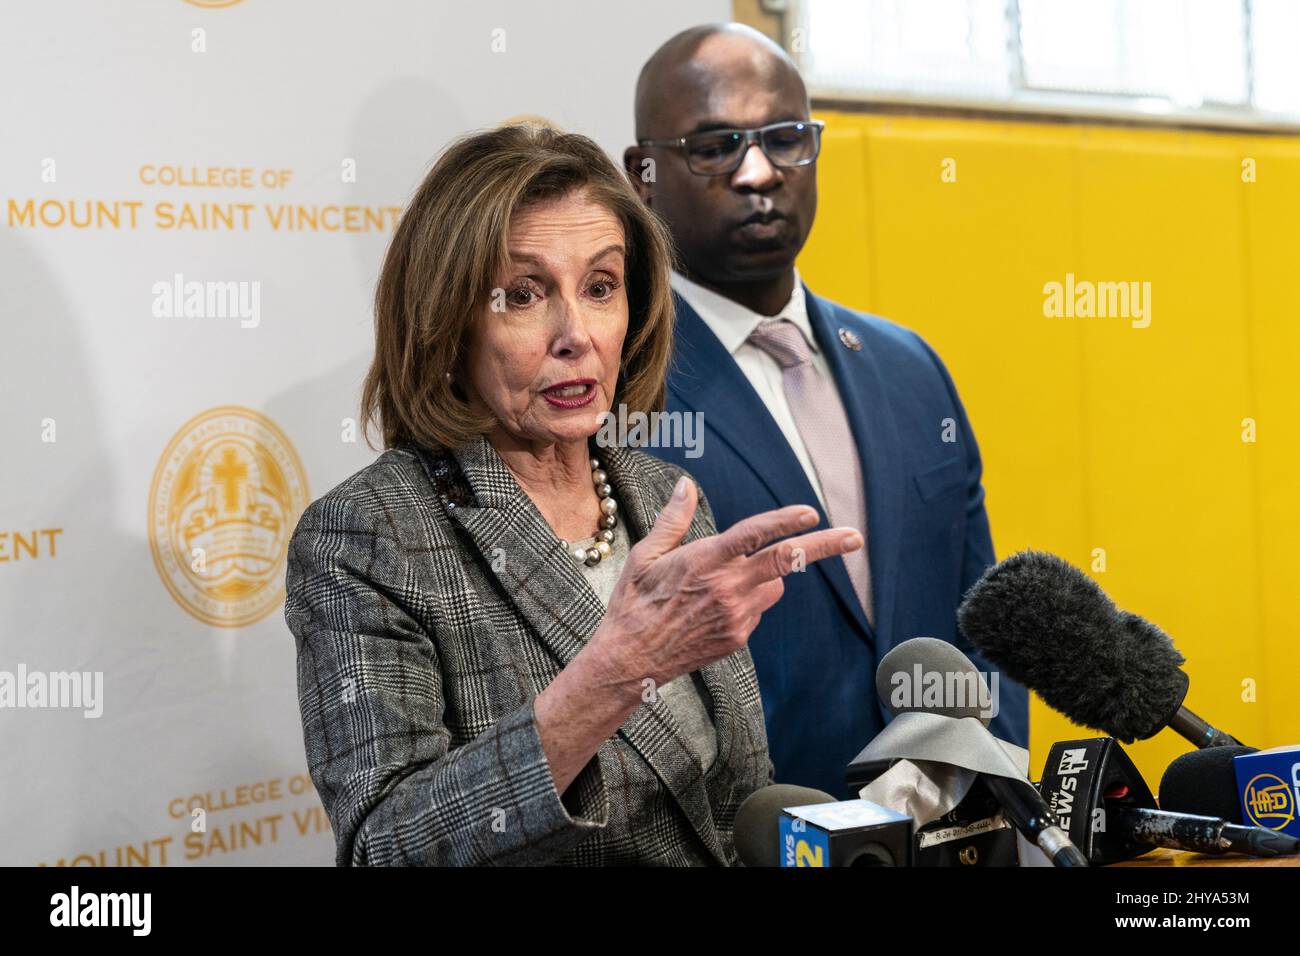 New York, NY - March 14, 2022: Representative Jamaal Bowman and Speaker Nancy Pelosi holding town hall at Mount Saint Vincent College Stock Photo